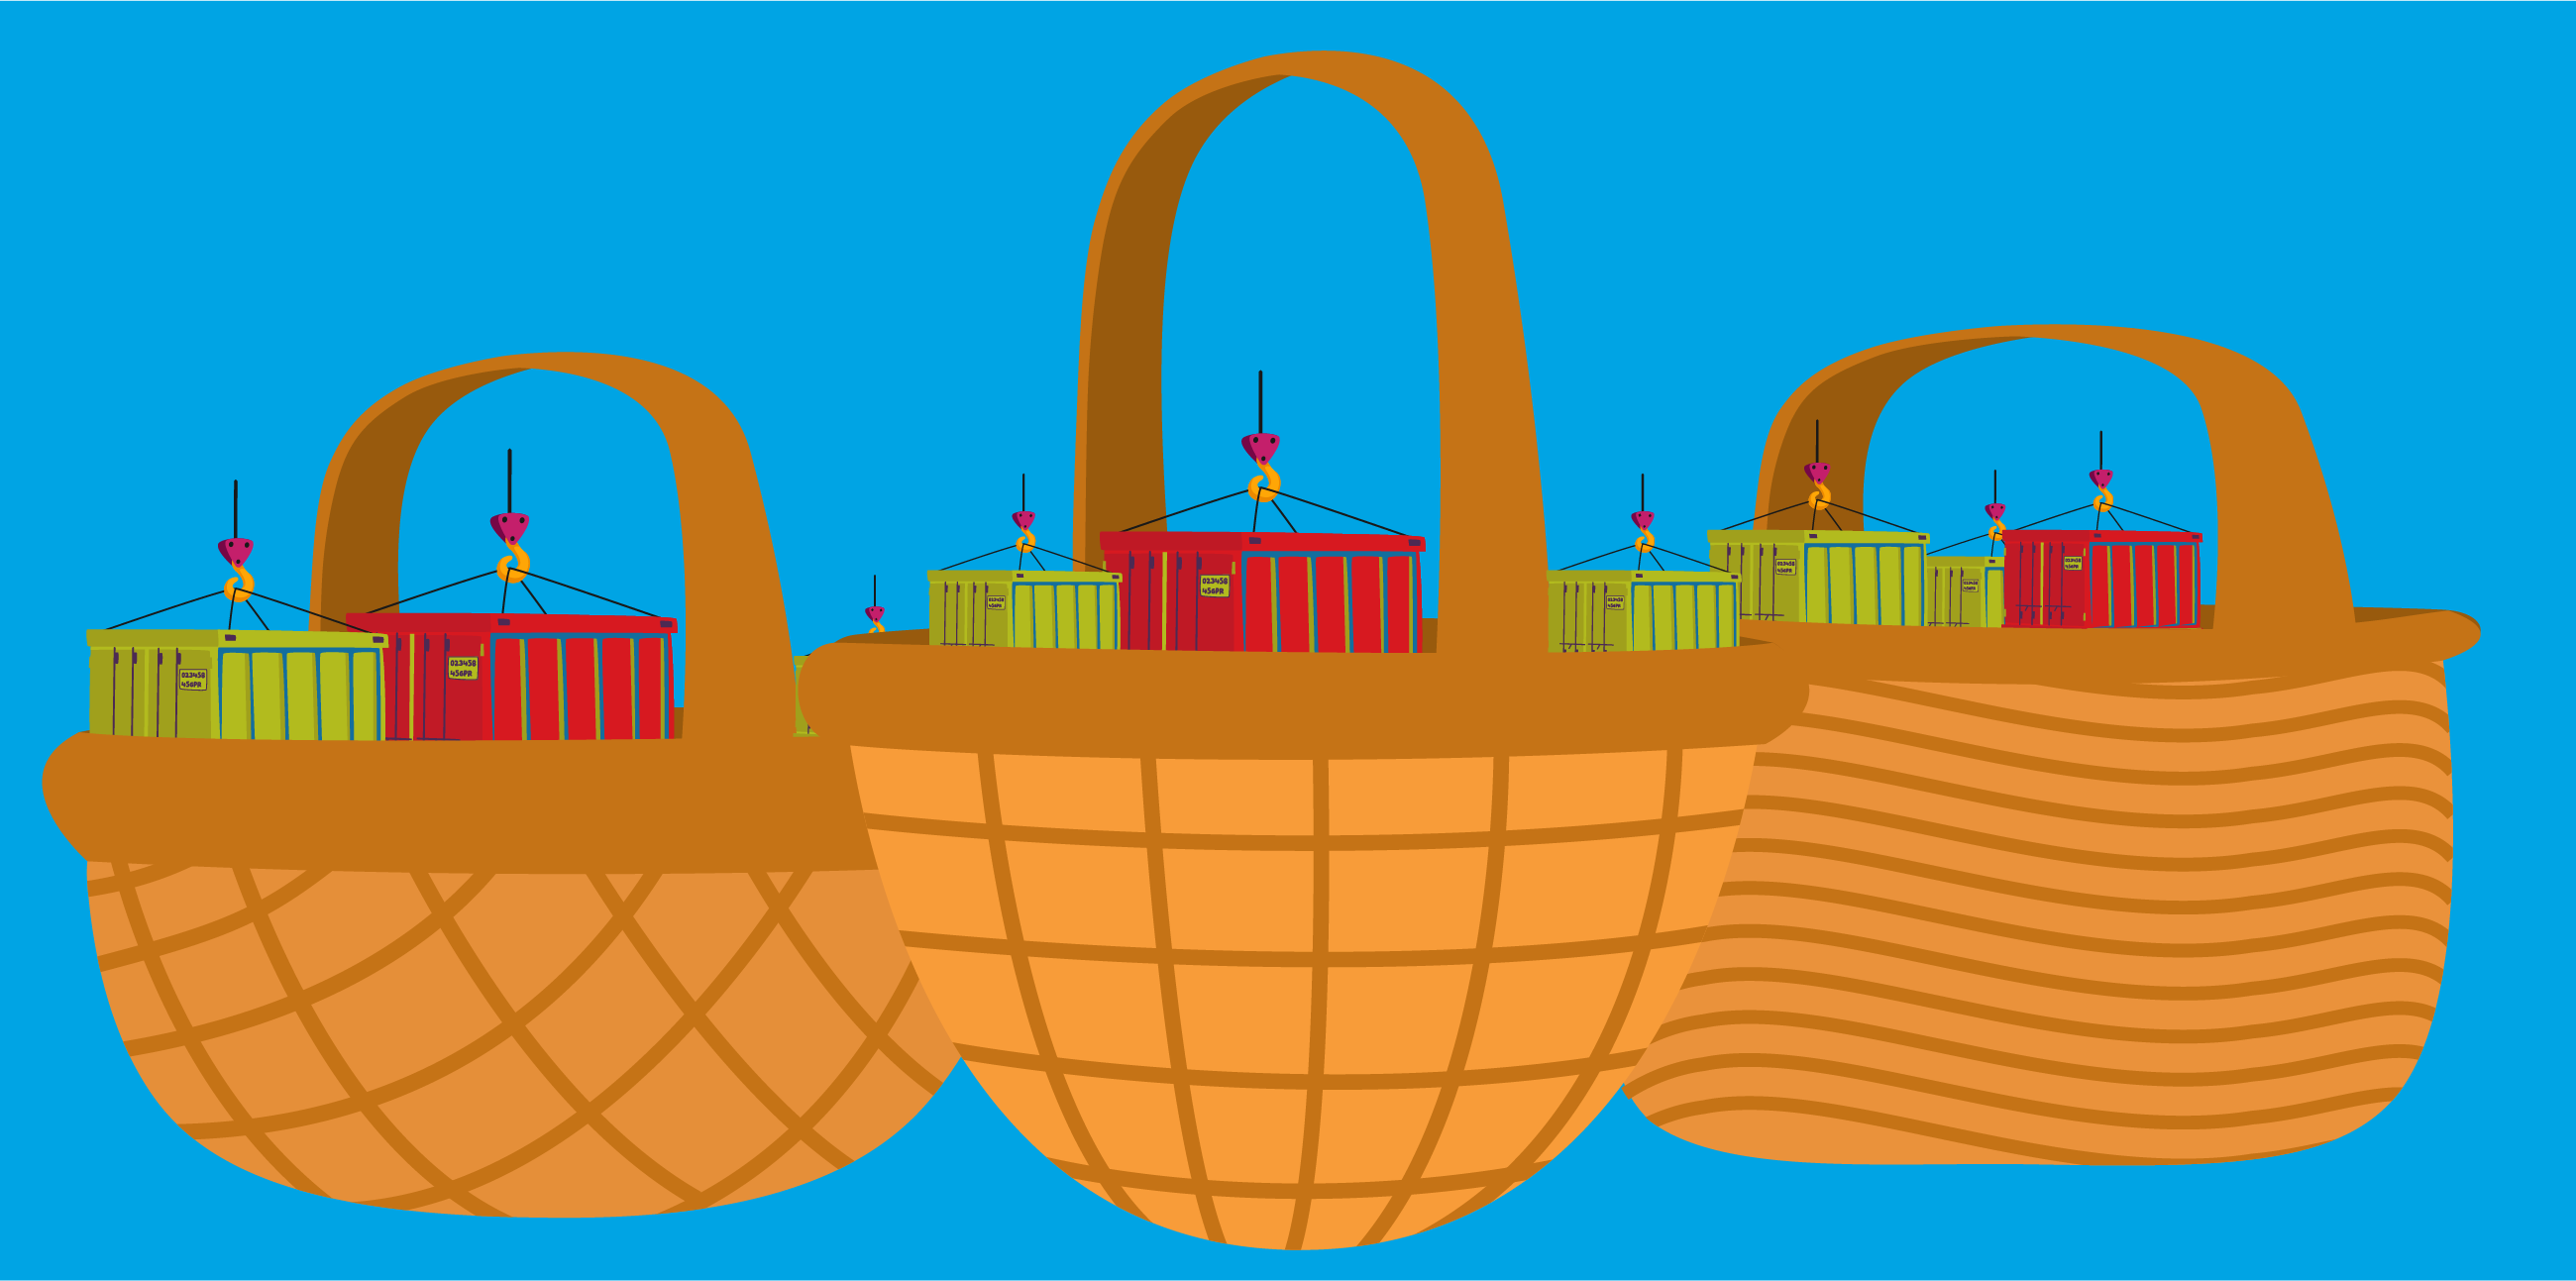 containers in a basket